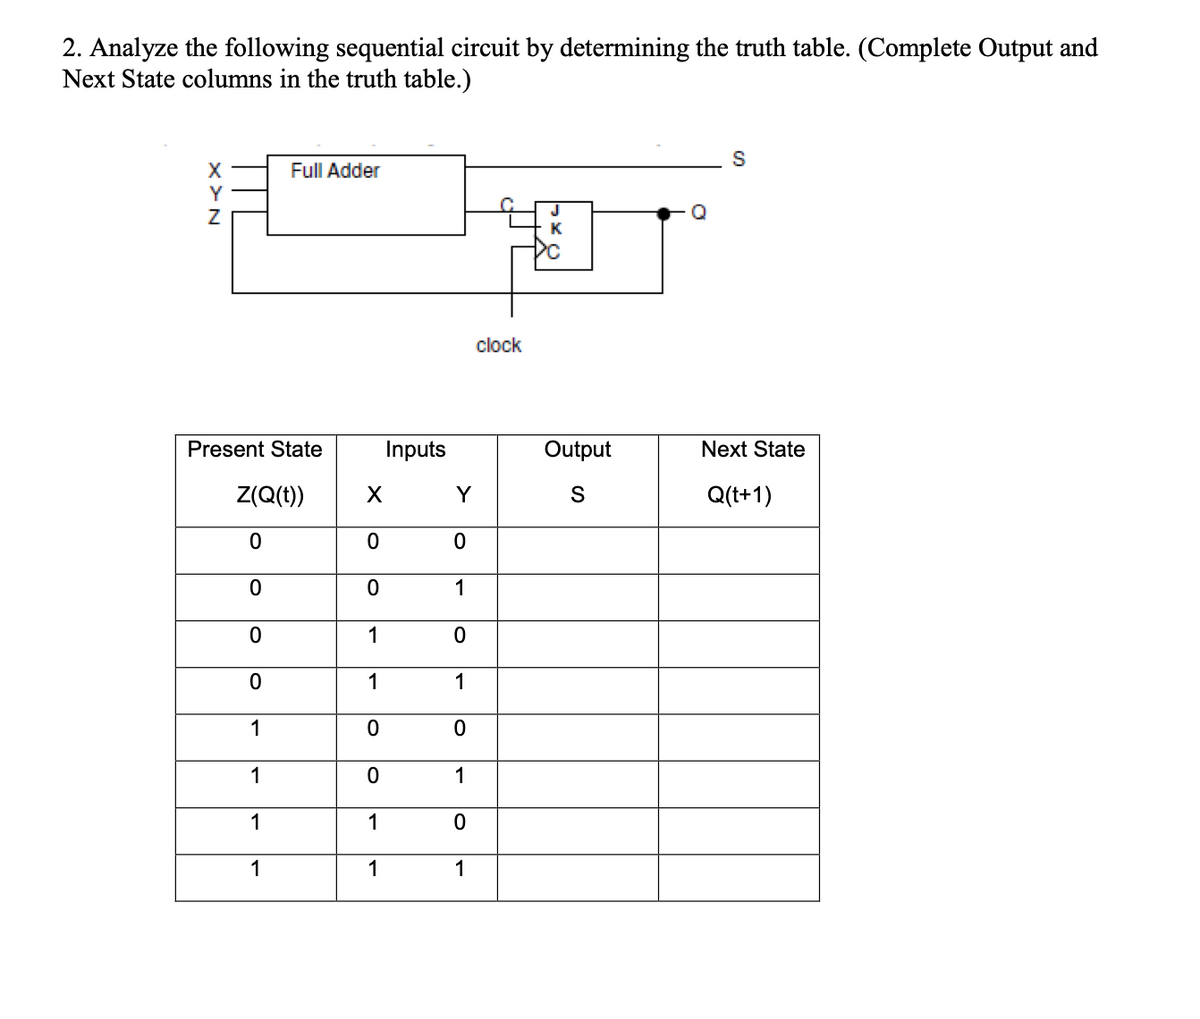 2. Analyze the following sequential circuit by determining the truth table. (Complete Output and
Next State columns in the truth table.)
XYN
X
Present State
Full Adder
Z(Q(t))
0
0
0
0
1
1
1
1
X
0
0
1
1
0
0
1
1
Inputs
Y
0
1
0
1
0
1
0
1
clock
Output
S
S
Next State
Q(t+1)